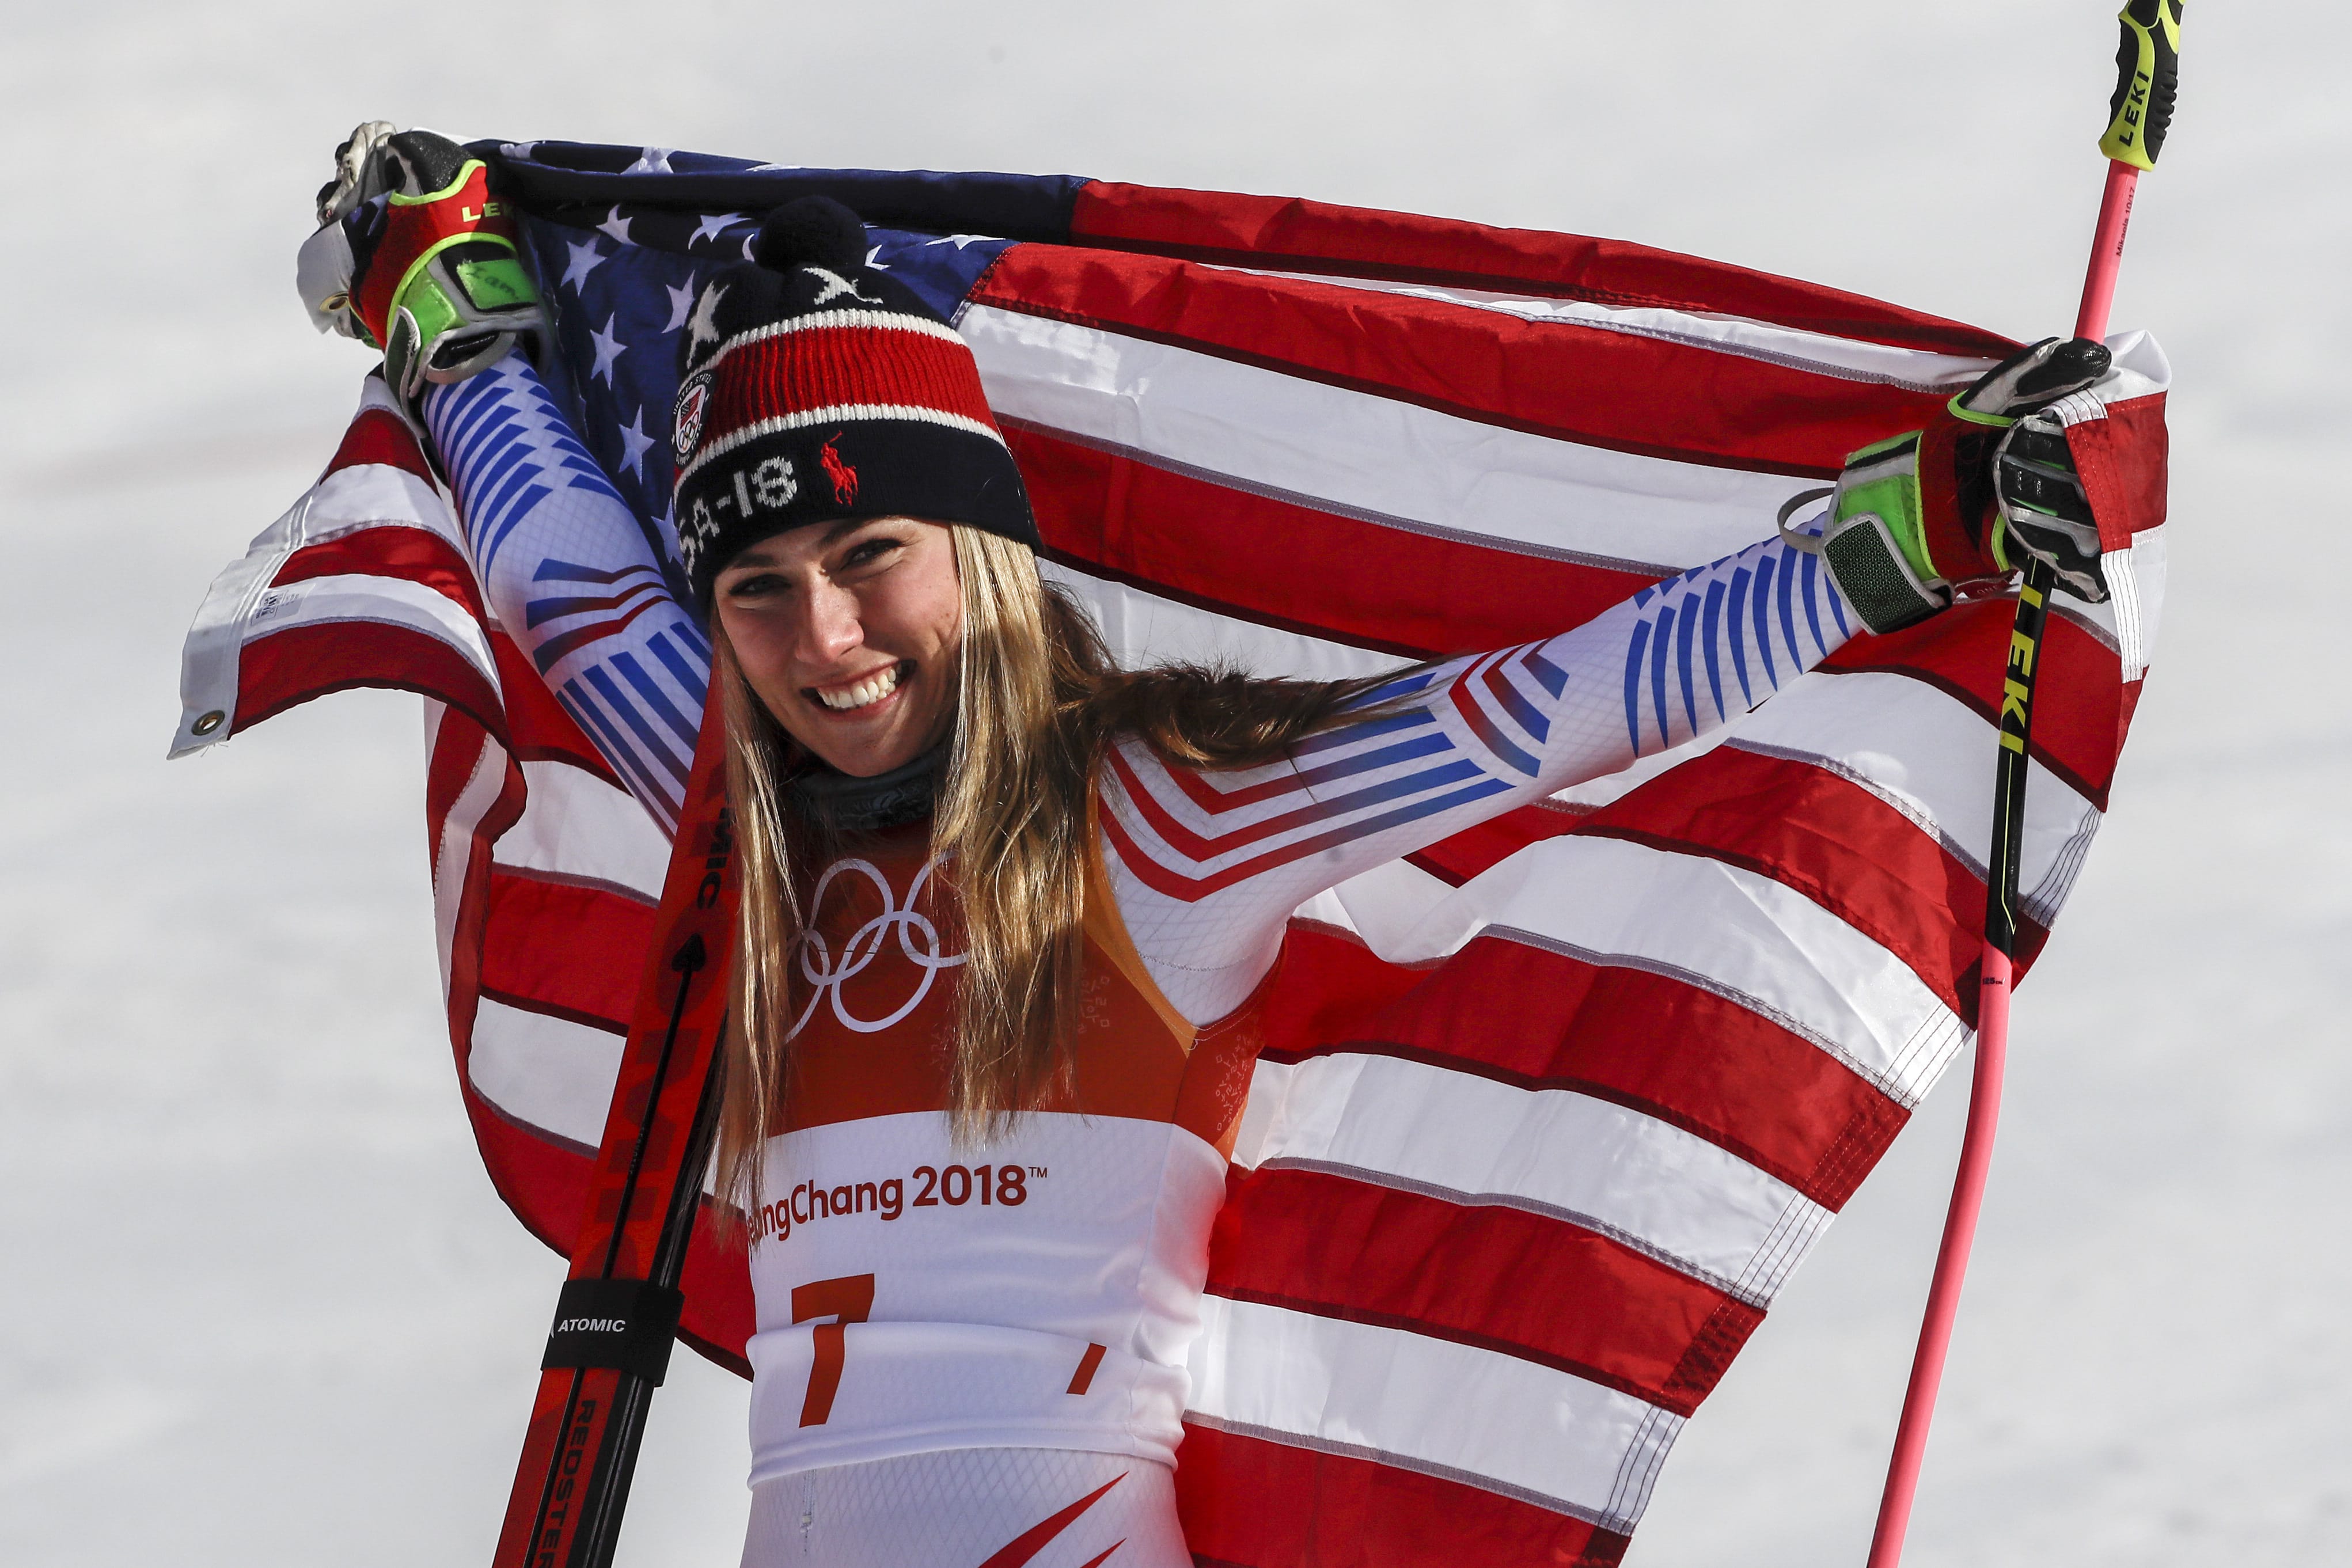 Mikaela Shiffrin, of the United States, celebrate her gold medal during the venue ceremony at the Women's Giant Slalom at the 2018 Winter Olympics in Pyeongchang, South Korea, Thursday, Feb. 15, 2018.